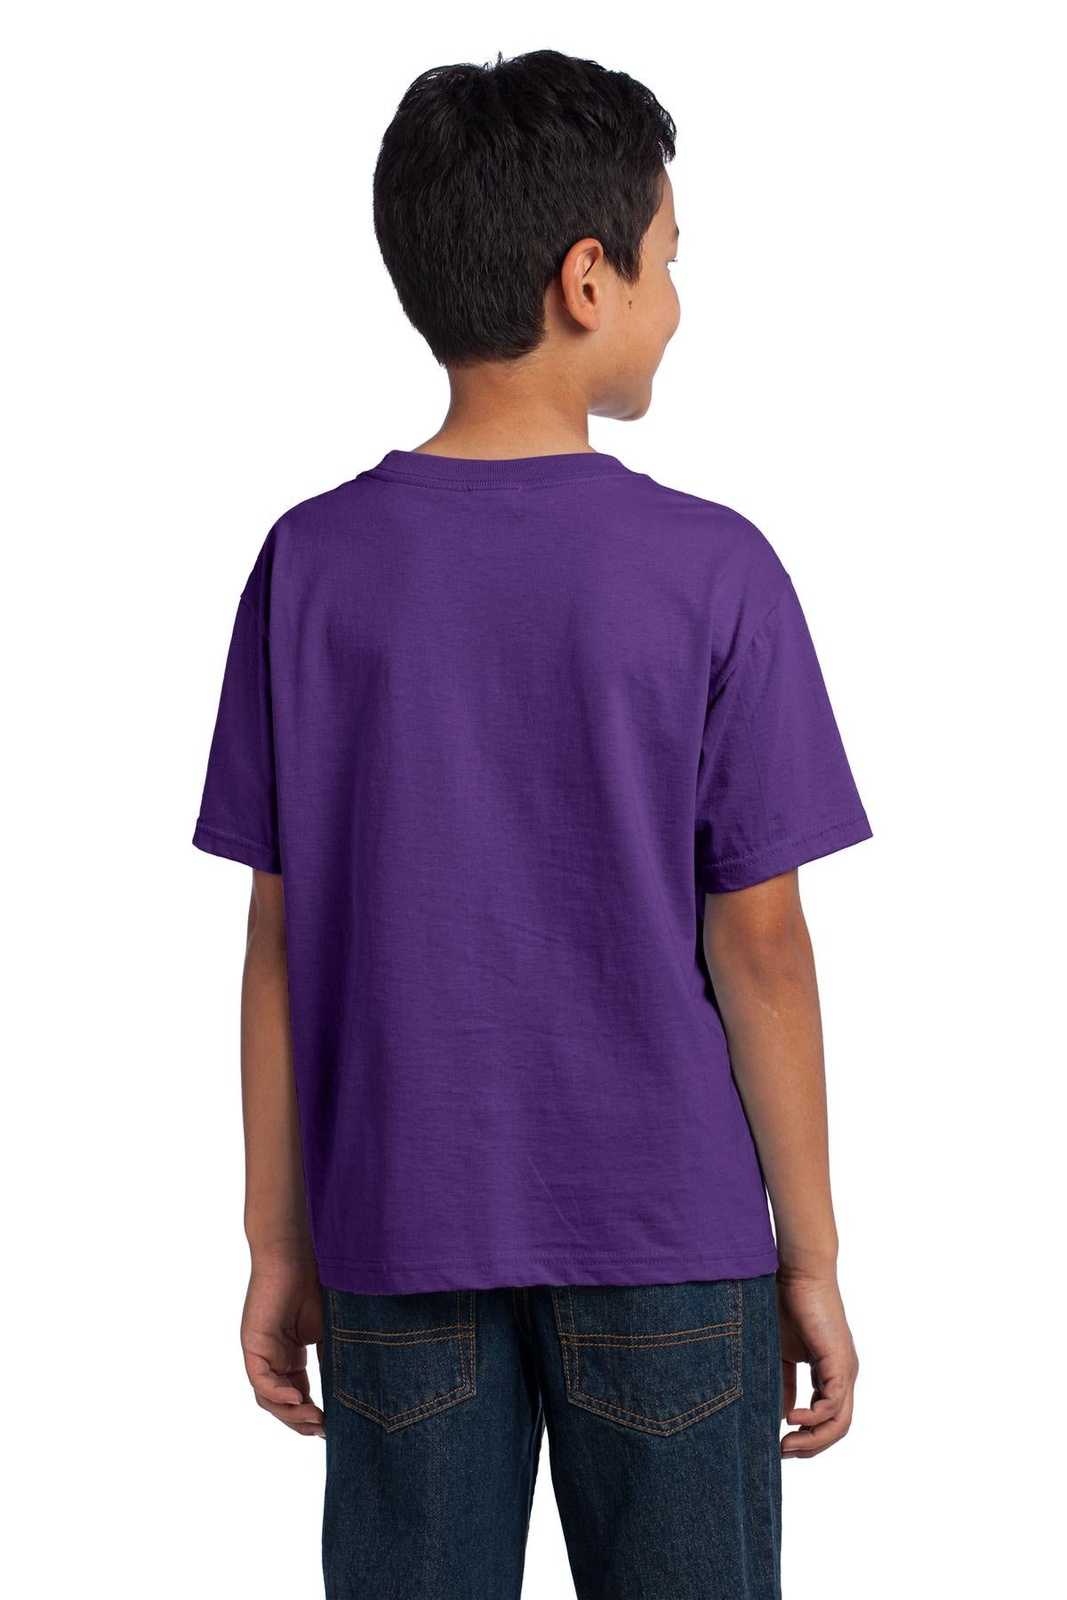 Fruit of the Loom 3930B Youth HD Cotton 100% Cotton T-Shirt - Purple - HIT a Double